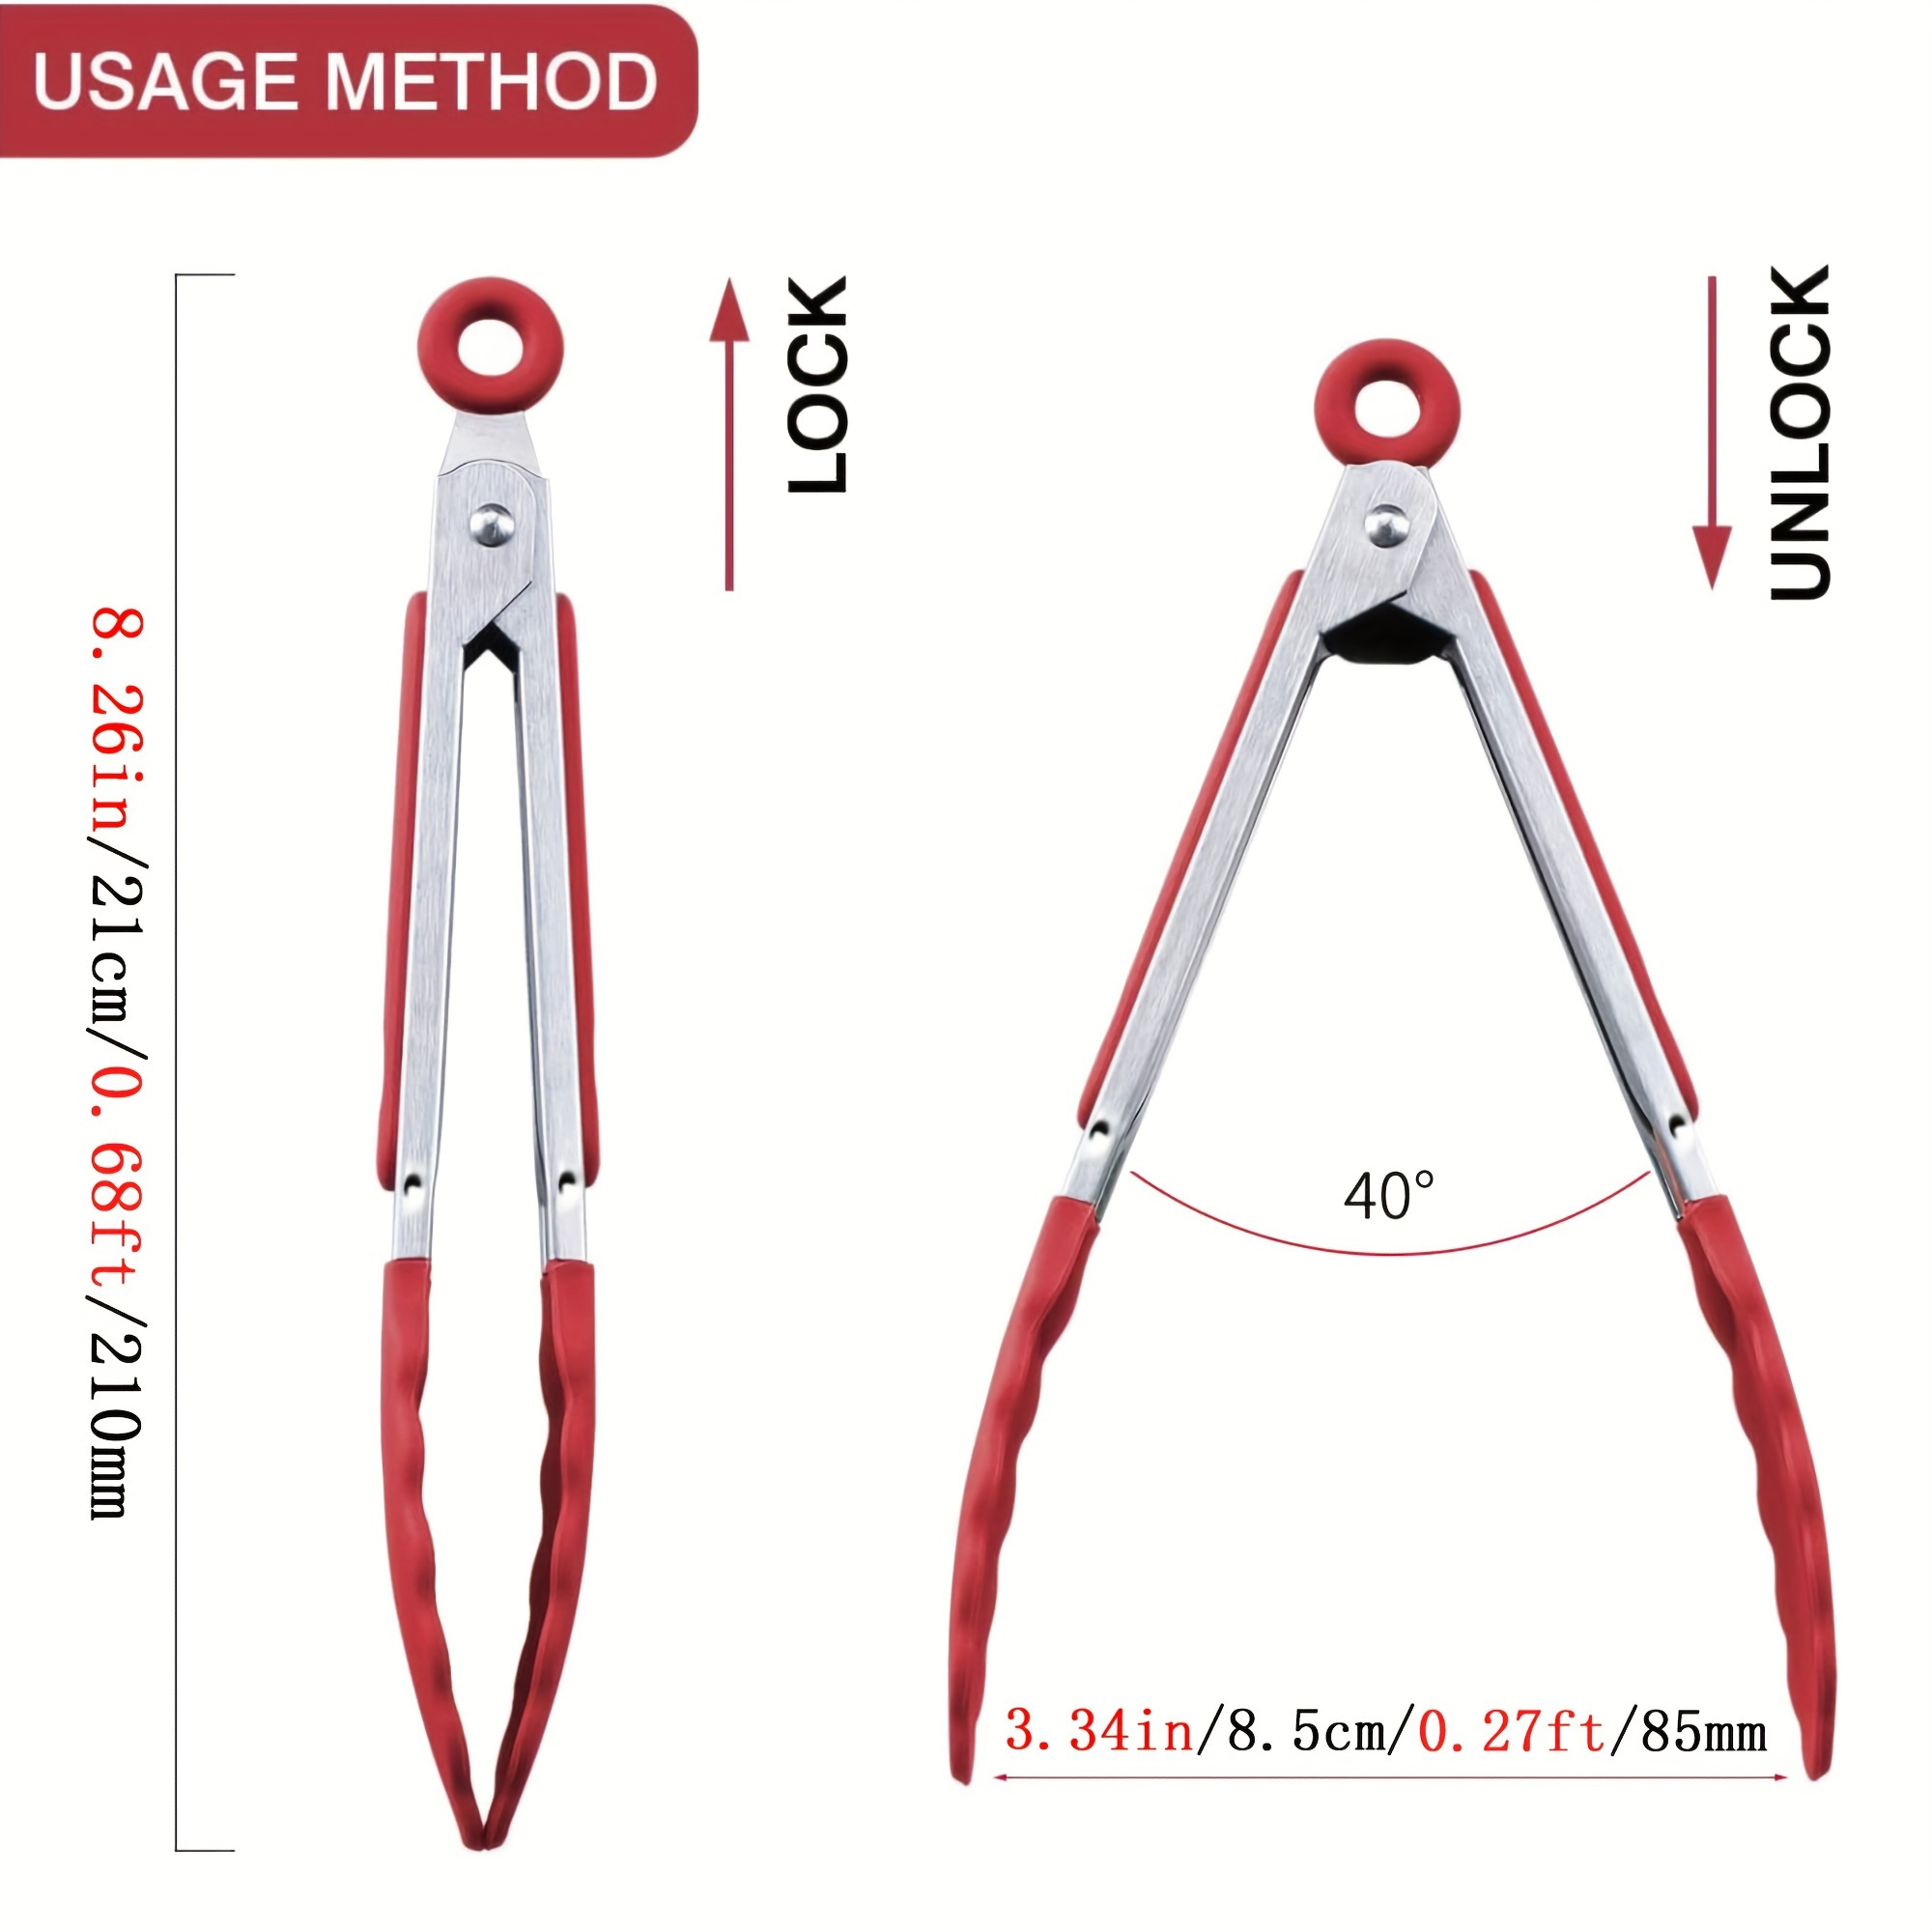 1 pack multi purpose kitchen tongs stainless steel food tongs for cooking grilling salad buffet serving and fruits durable bbq and kitchen utensils